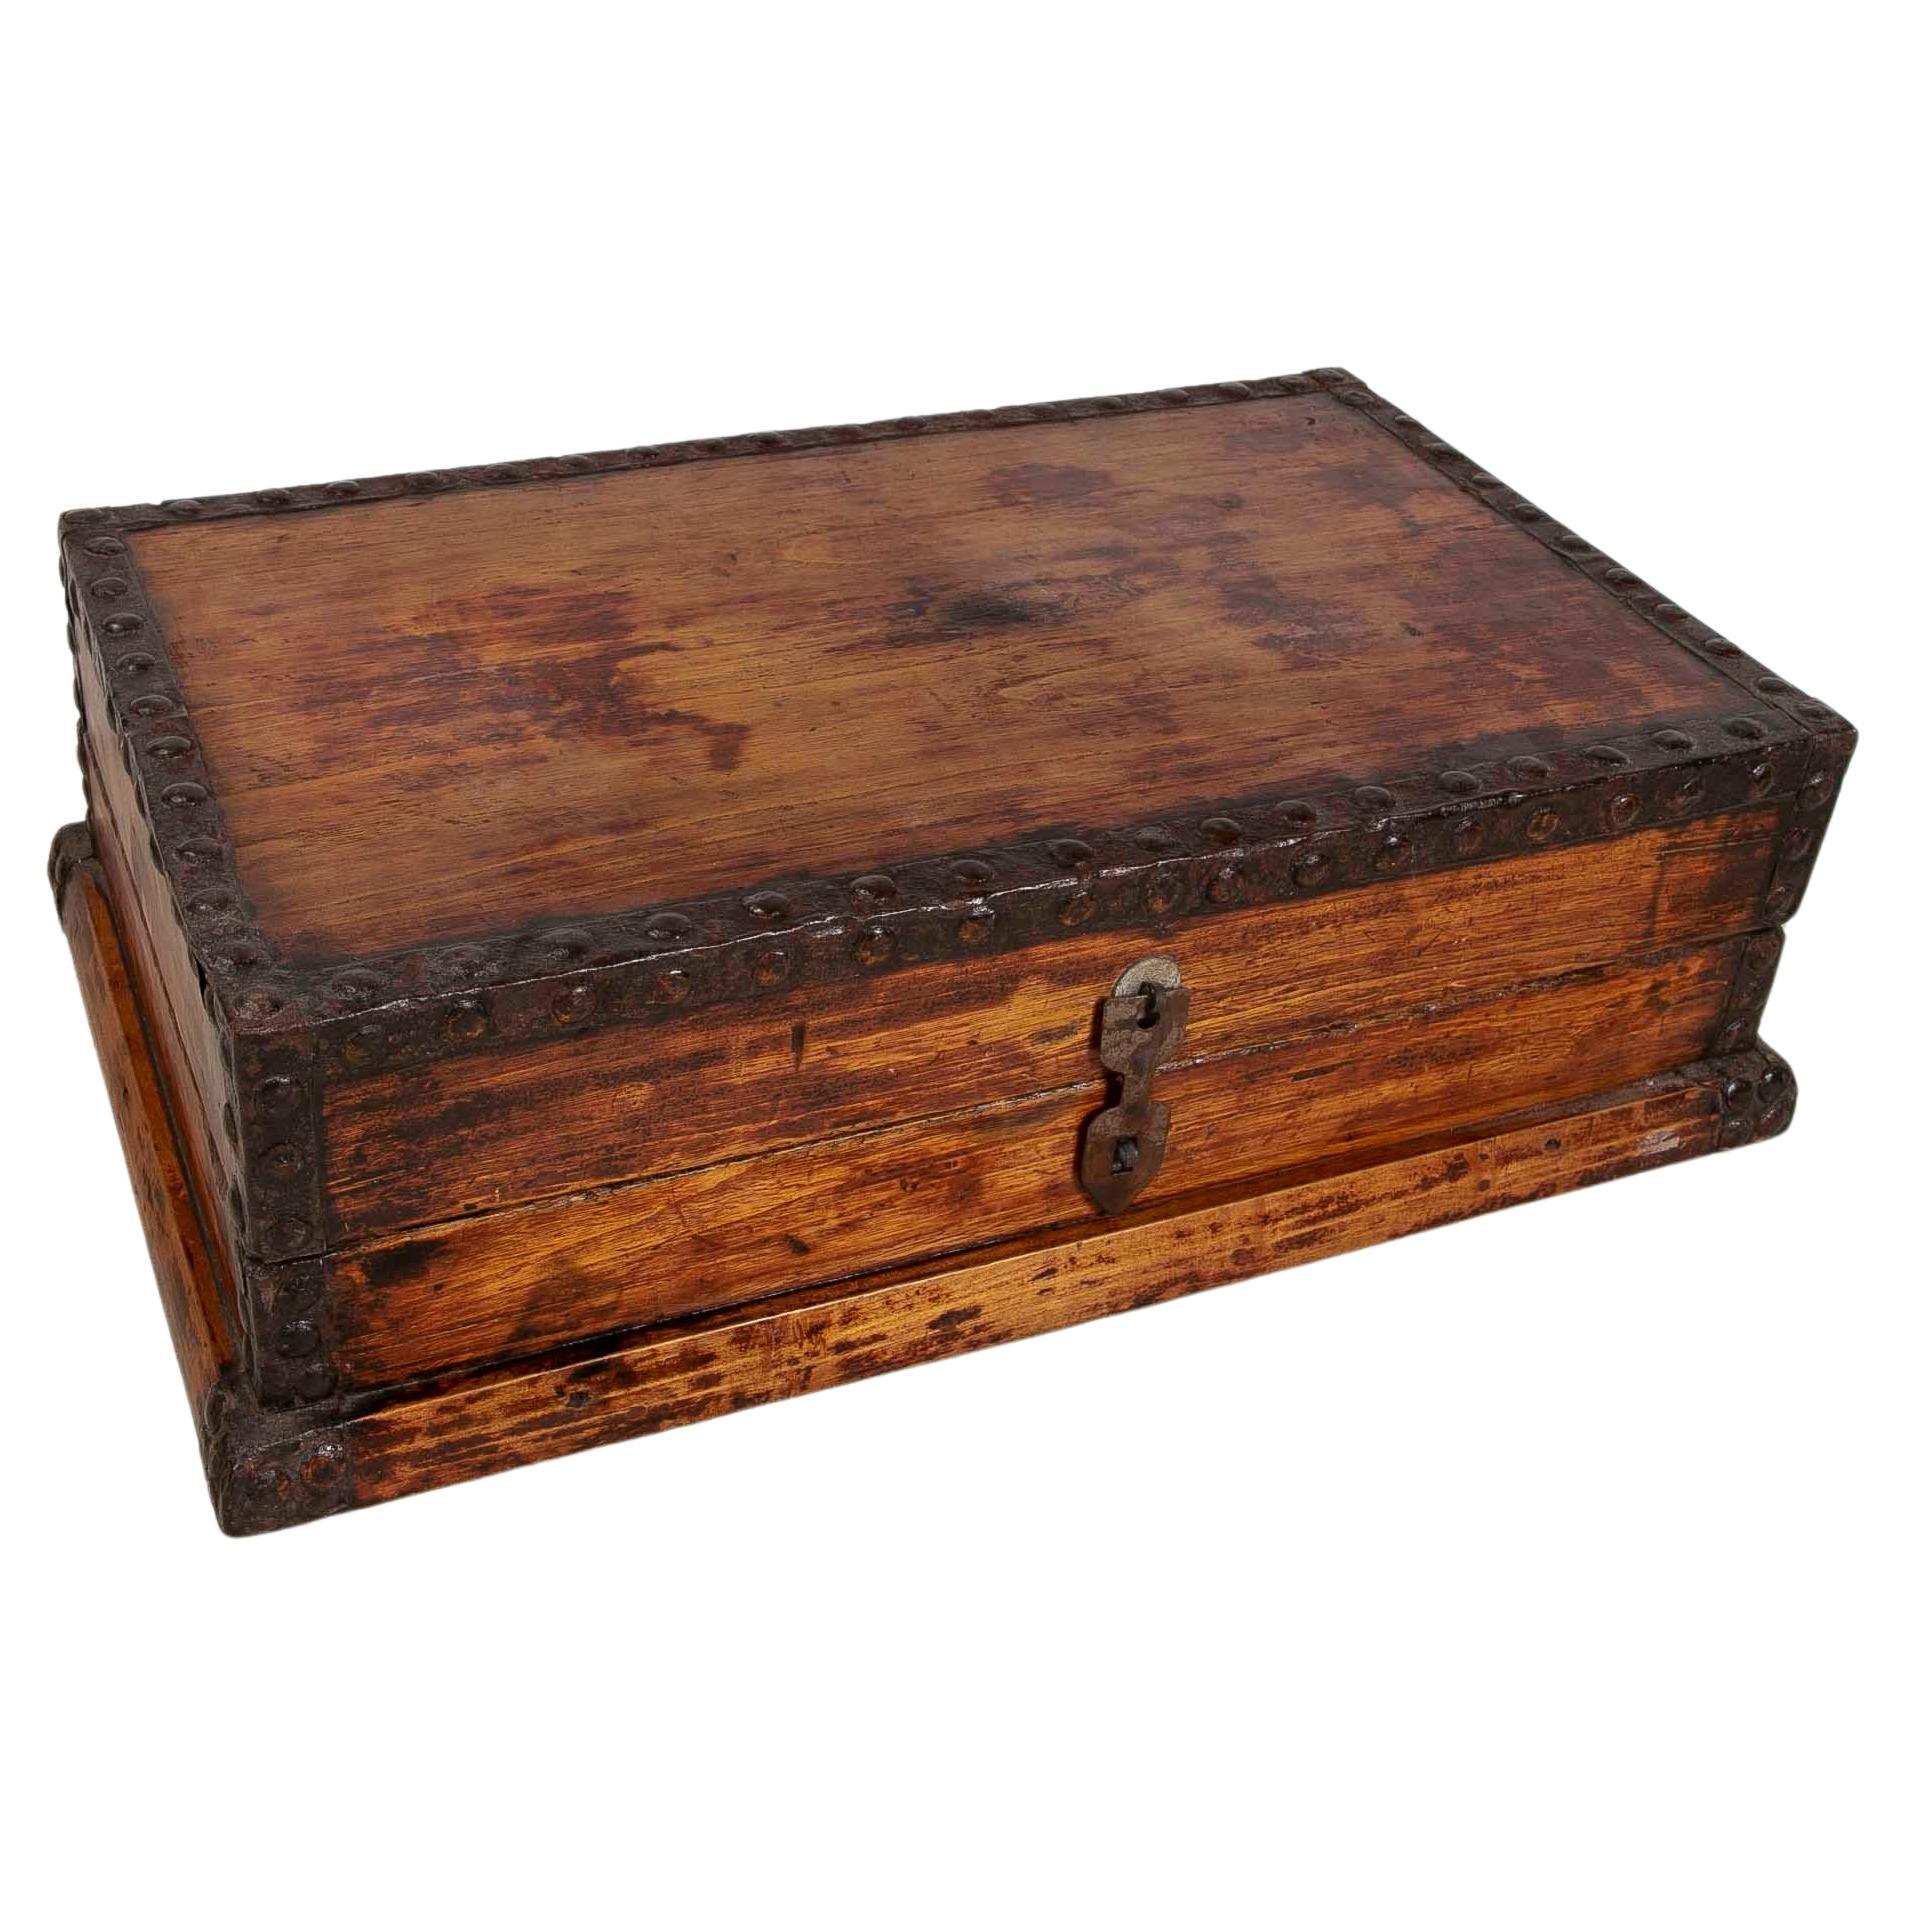 1930s Wooden Box with Iron Corners